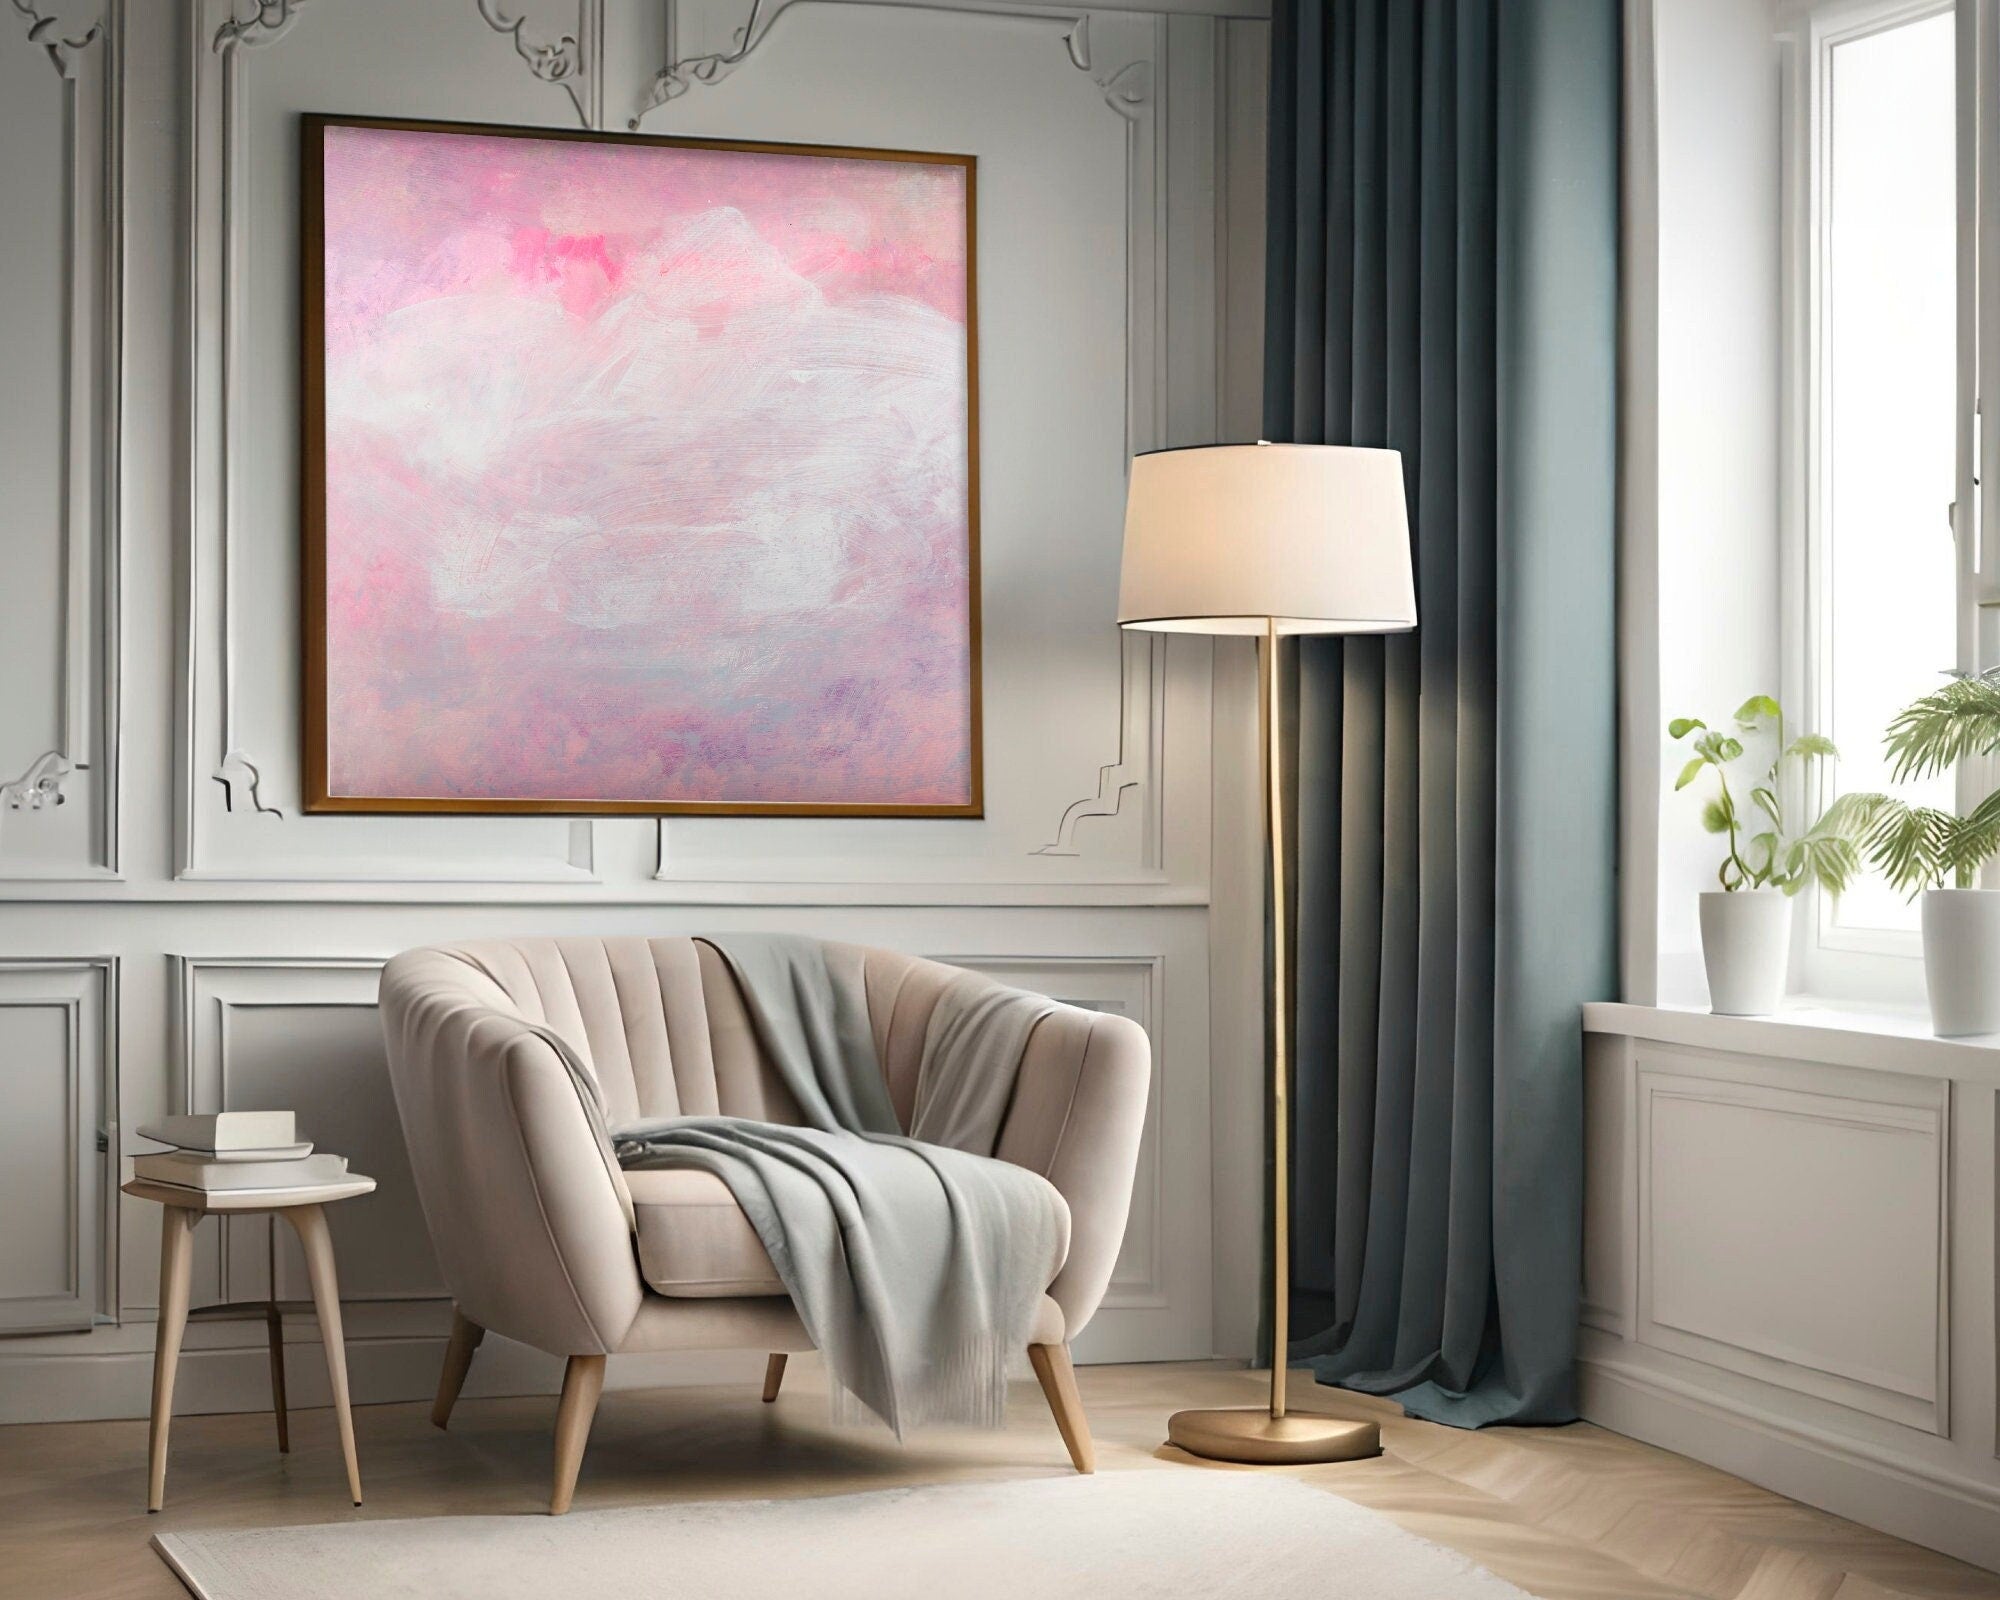 A living room which has a minimalist brush stroke painting created by Camilo Mattis